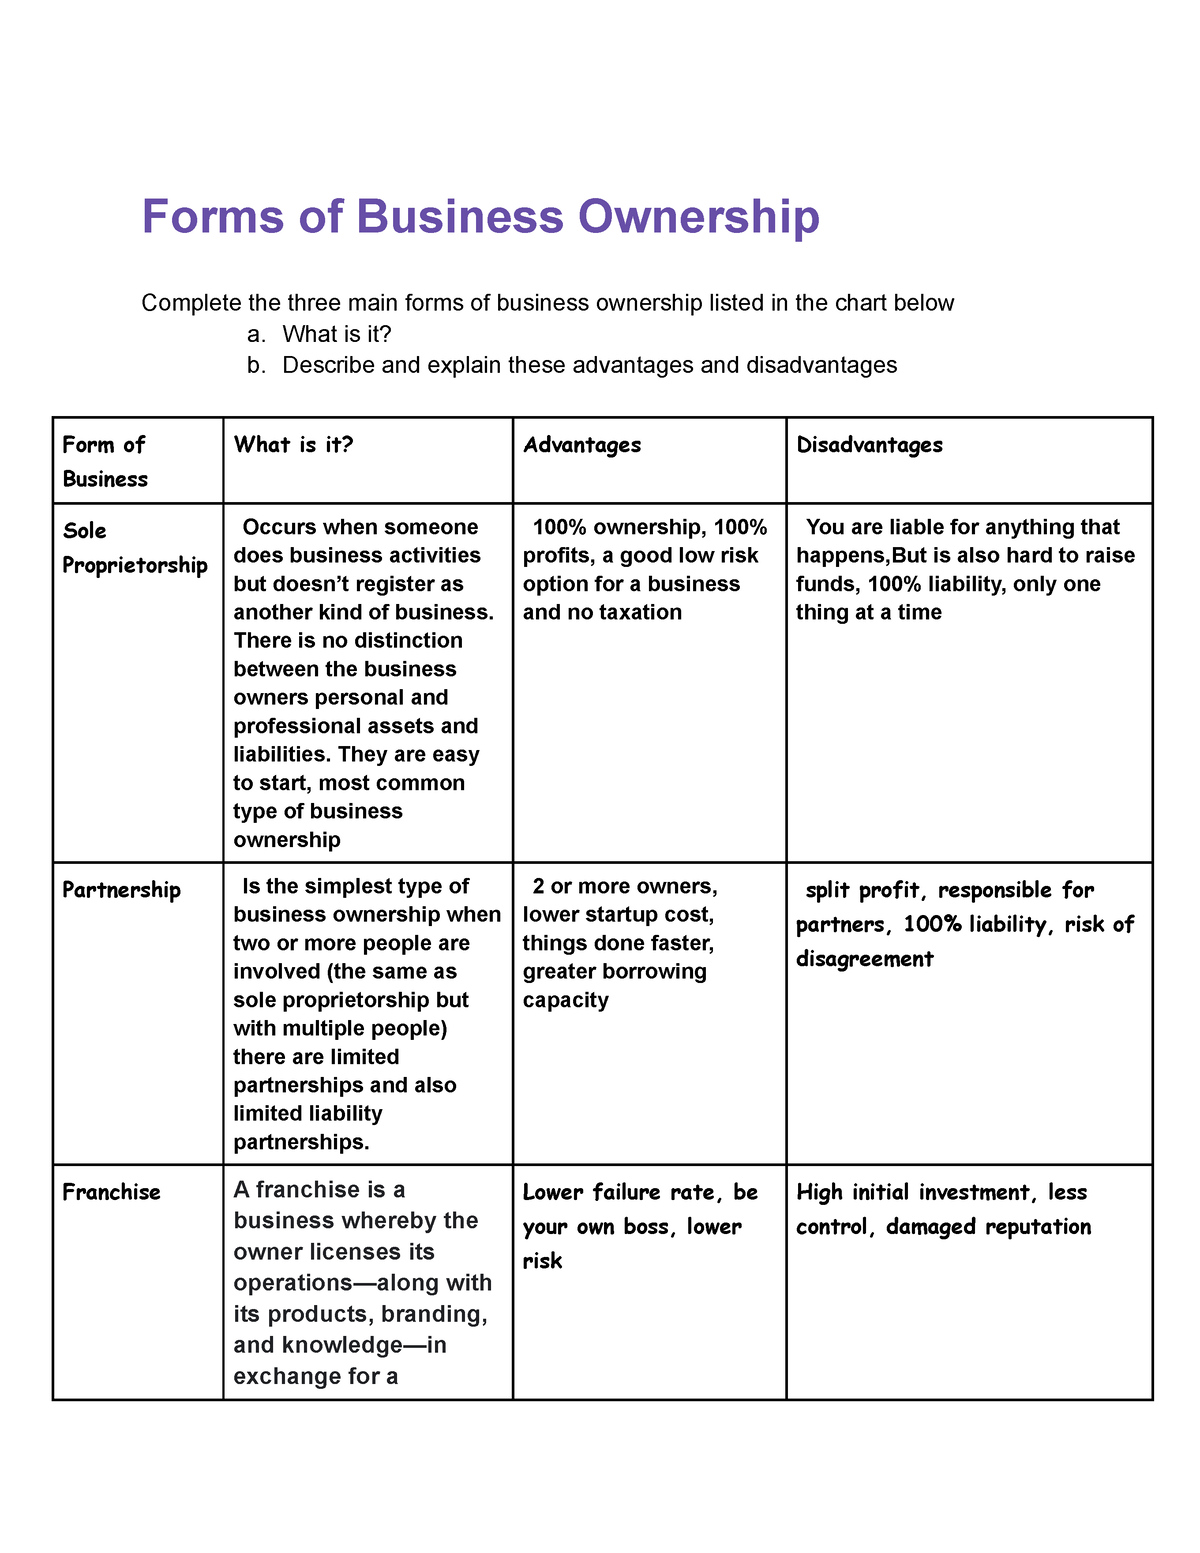 business essay on forms of ownership